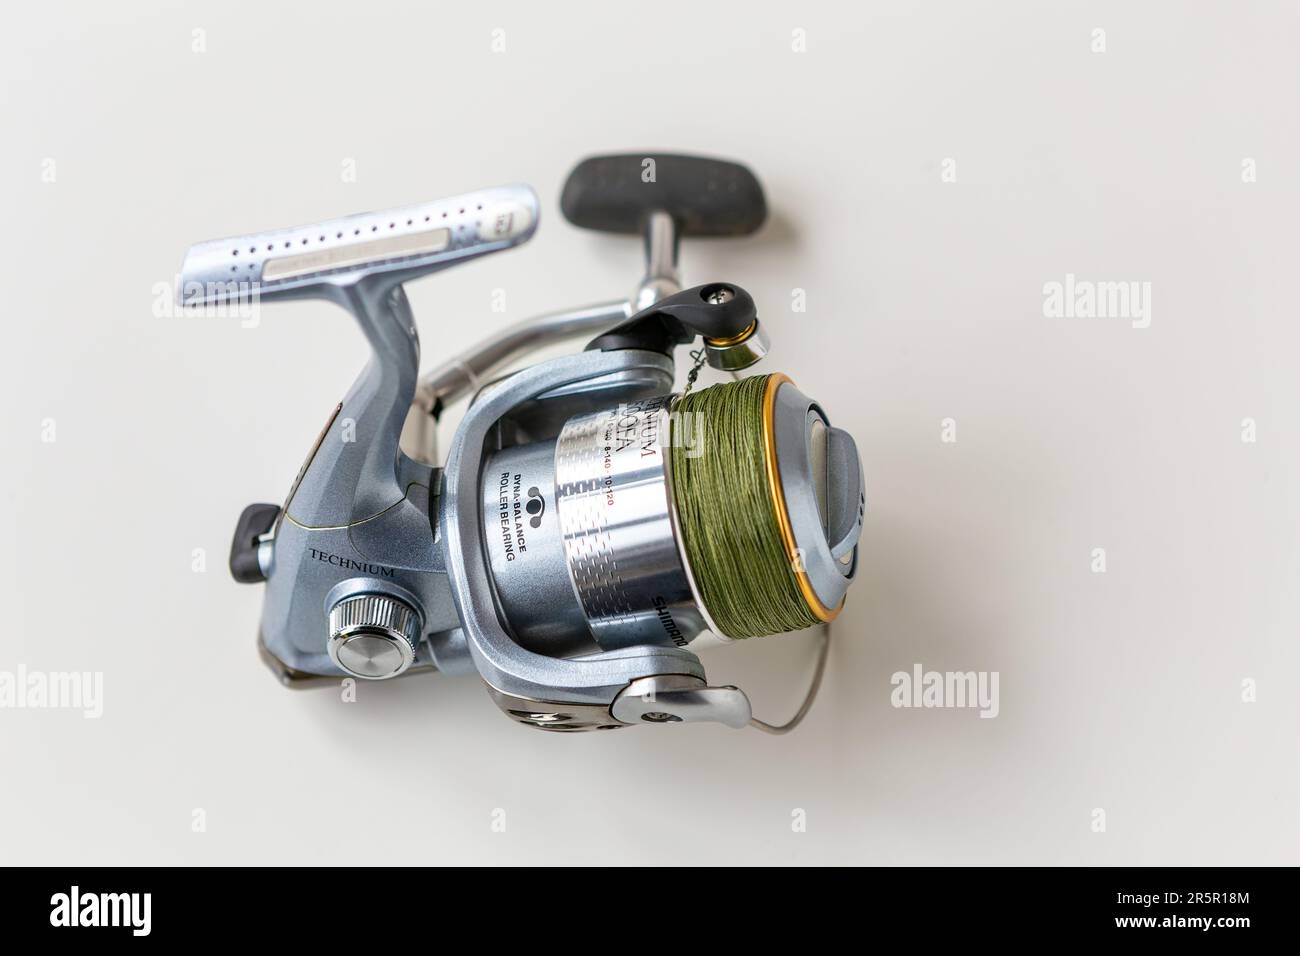 https://c8.alamy.com/comp/2R5R18M/kyiv-ukraine-27-january-2023-blue-steel-fishing-reel-with-cord-wound-on-a-spool-on-a-white-background-shimano-technium-it-is-a-pro-fishing-tool-o-2R5R18M.jpg